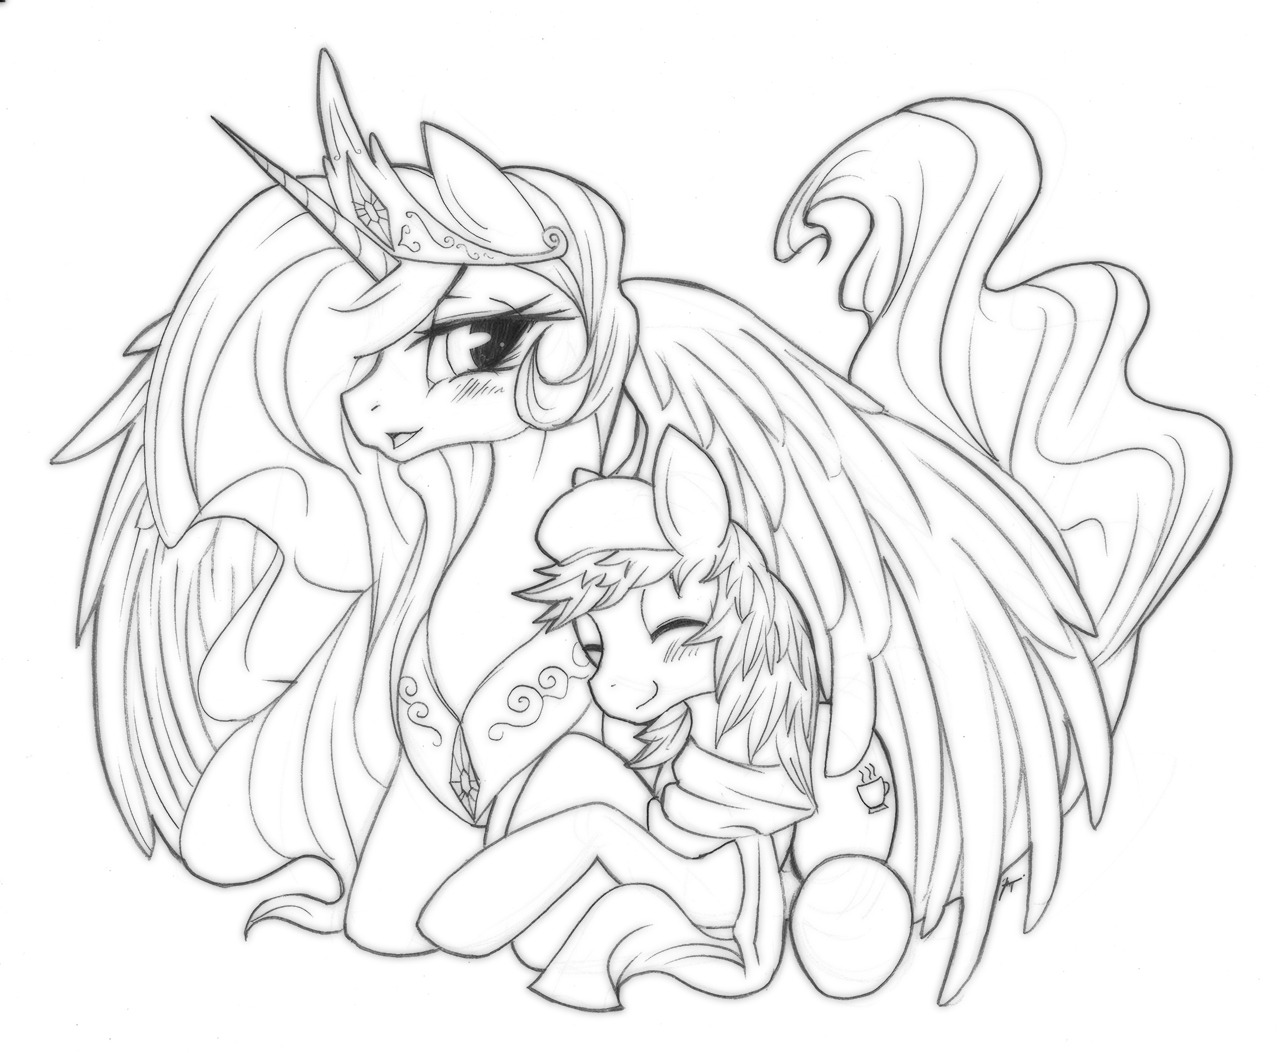 HBD gift for little horse coffee! His favorite is princess Celestia.So! 1 one special